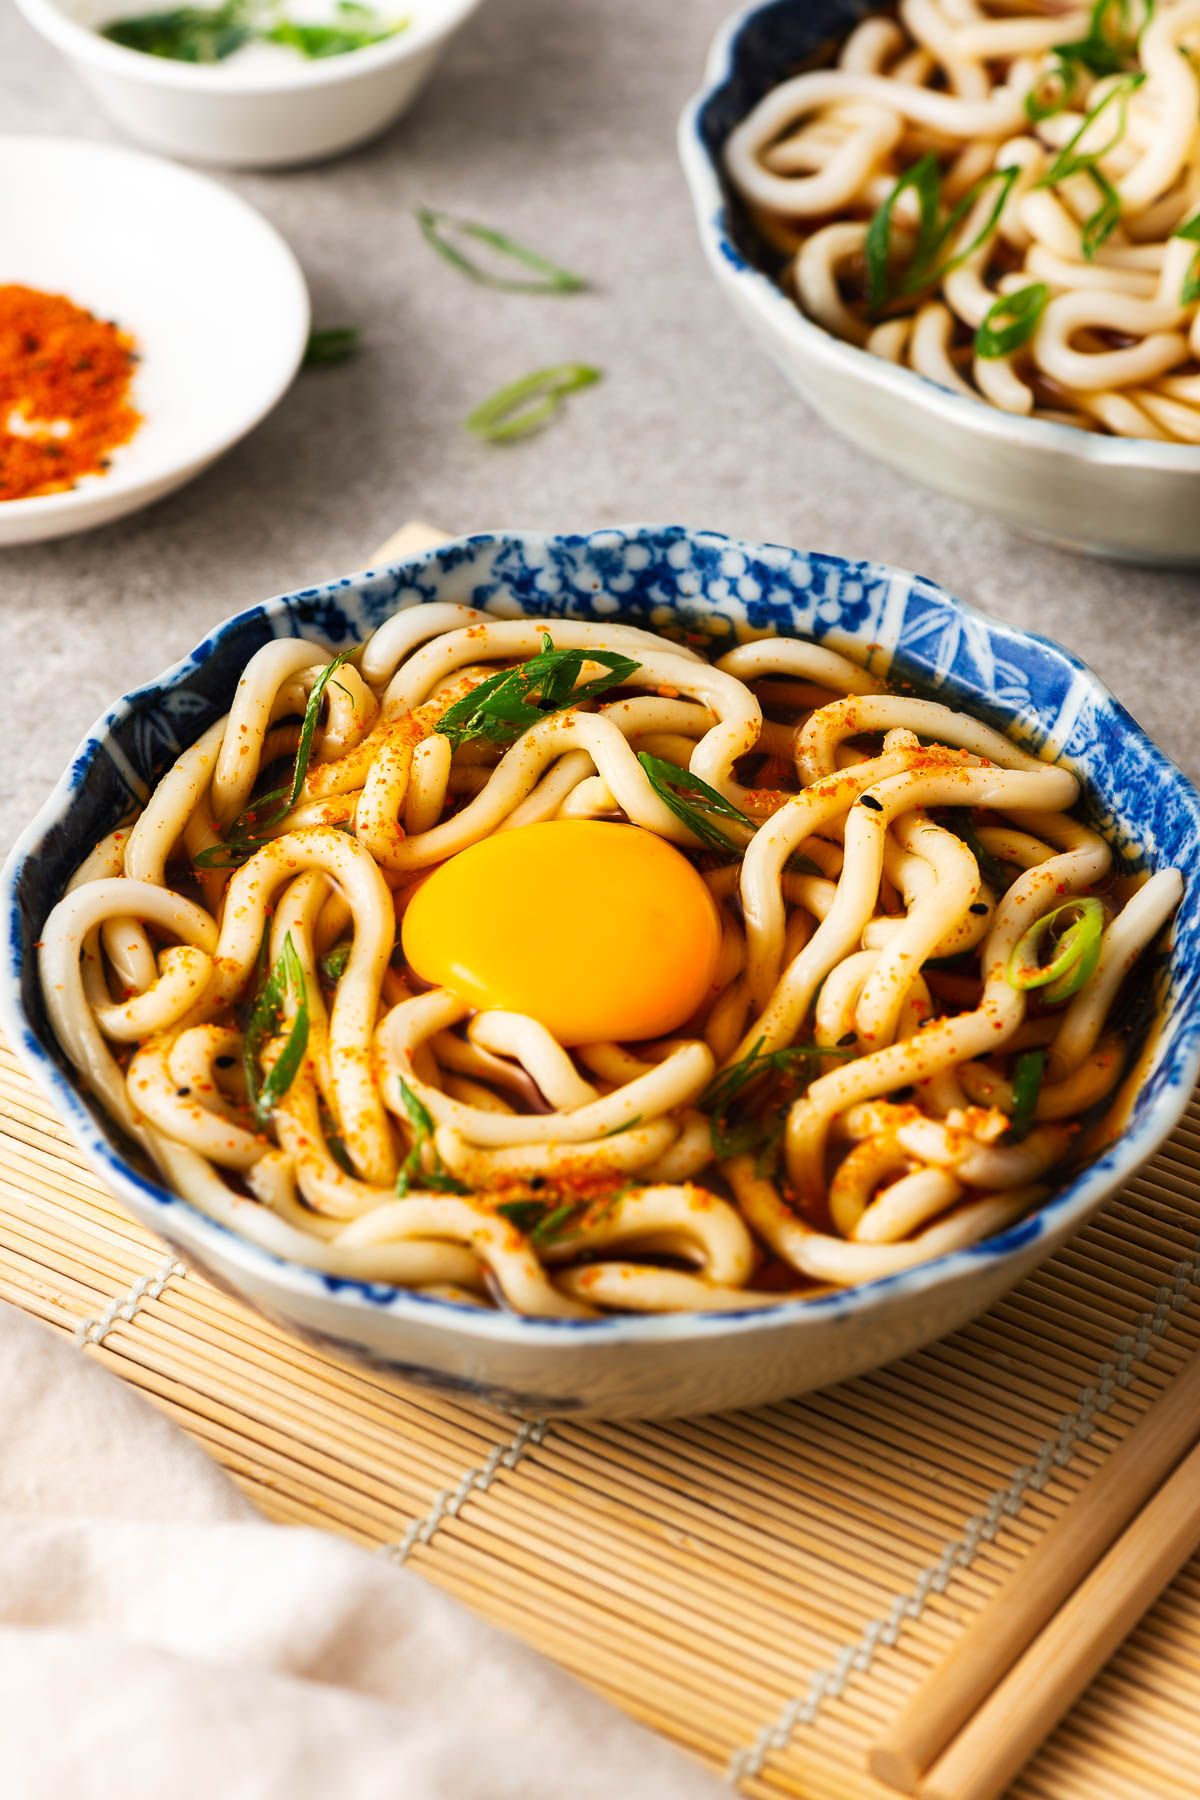 A Japanese ceramic bowl with moon viewing noodles, a raw egg yolk nestled into the noodles resembles the full moon.